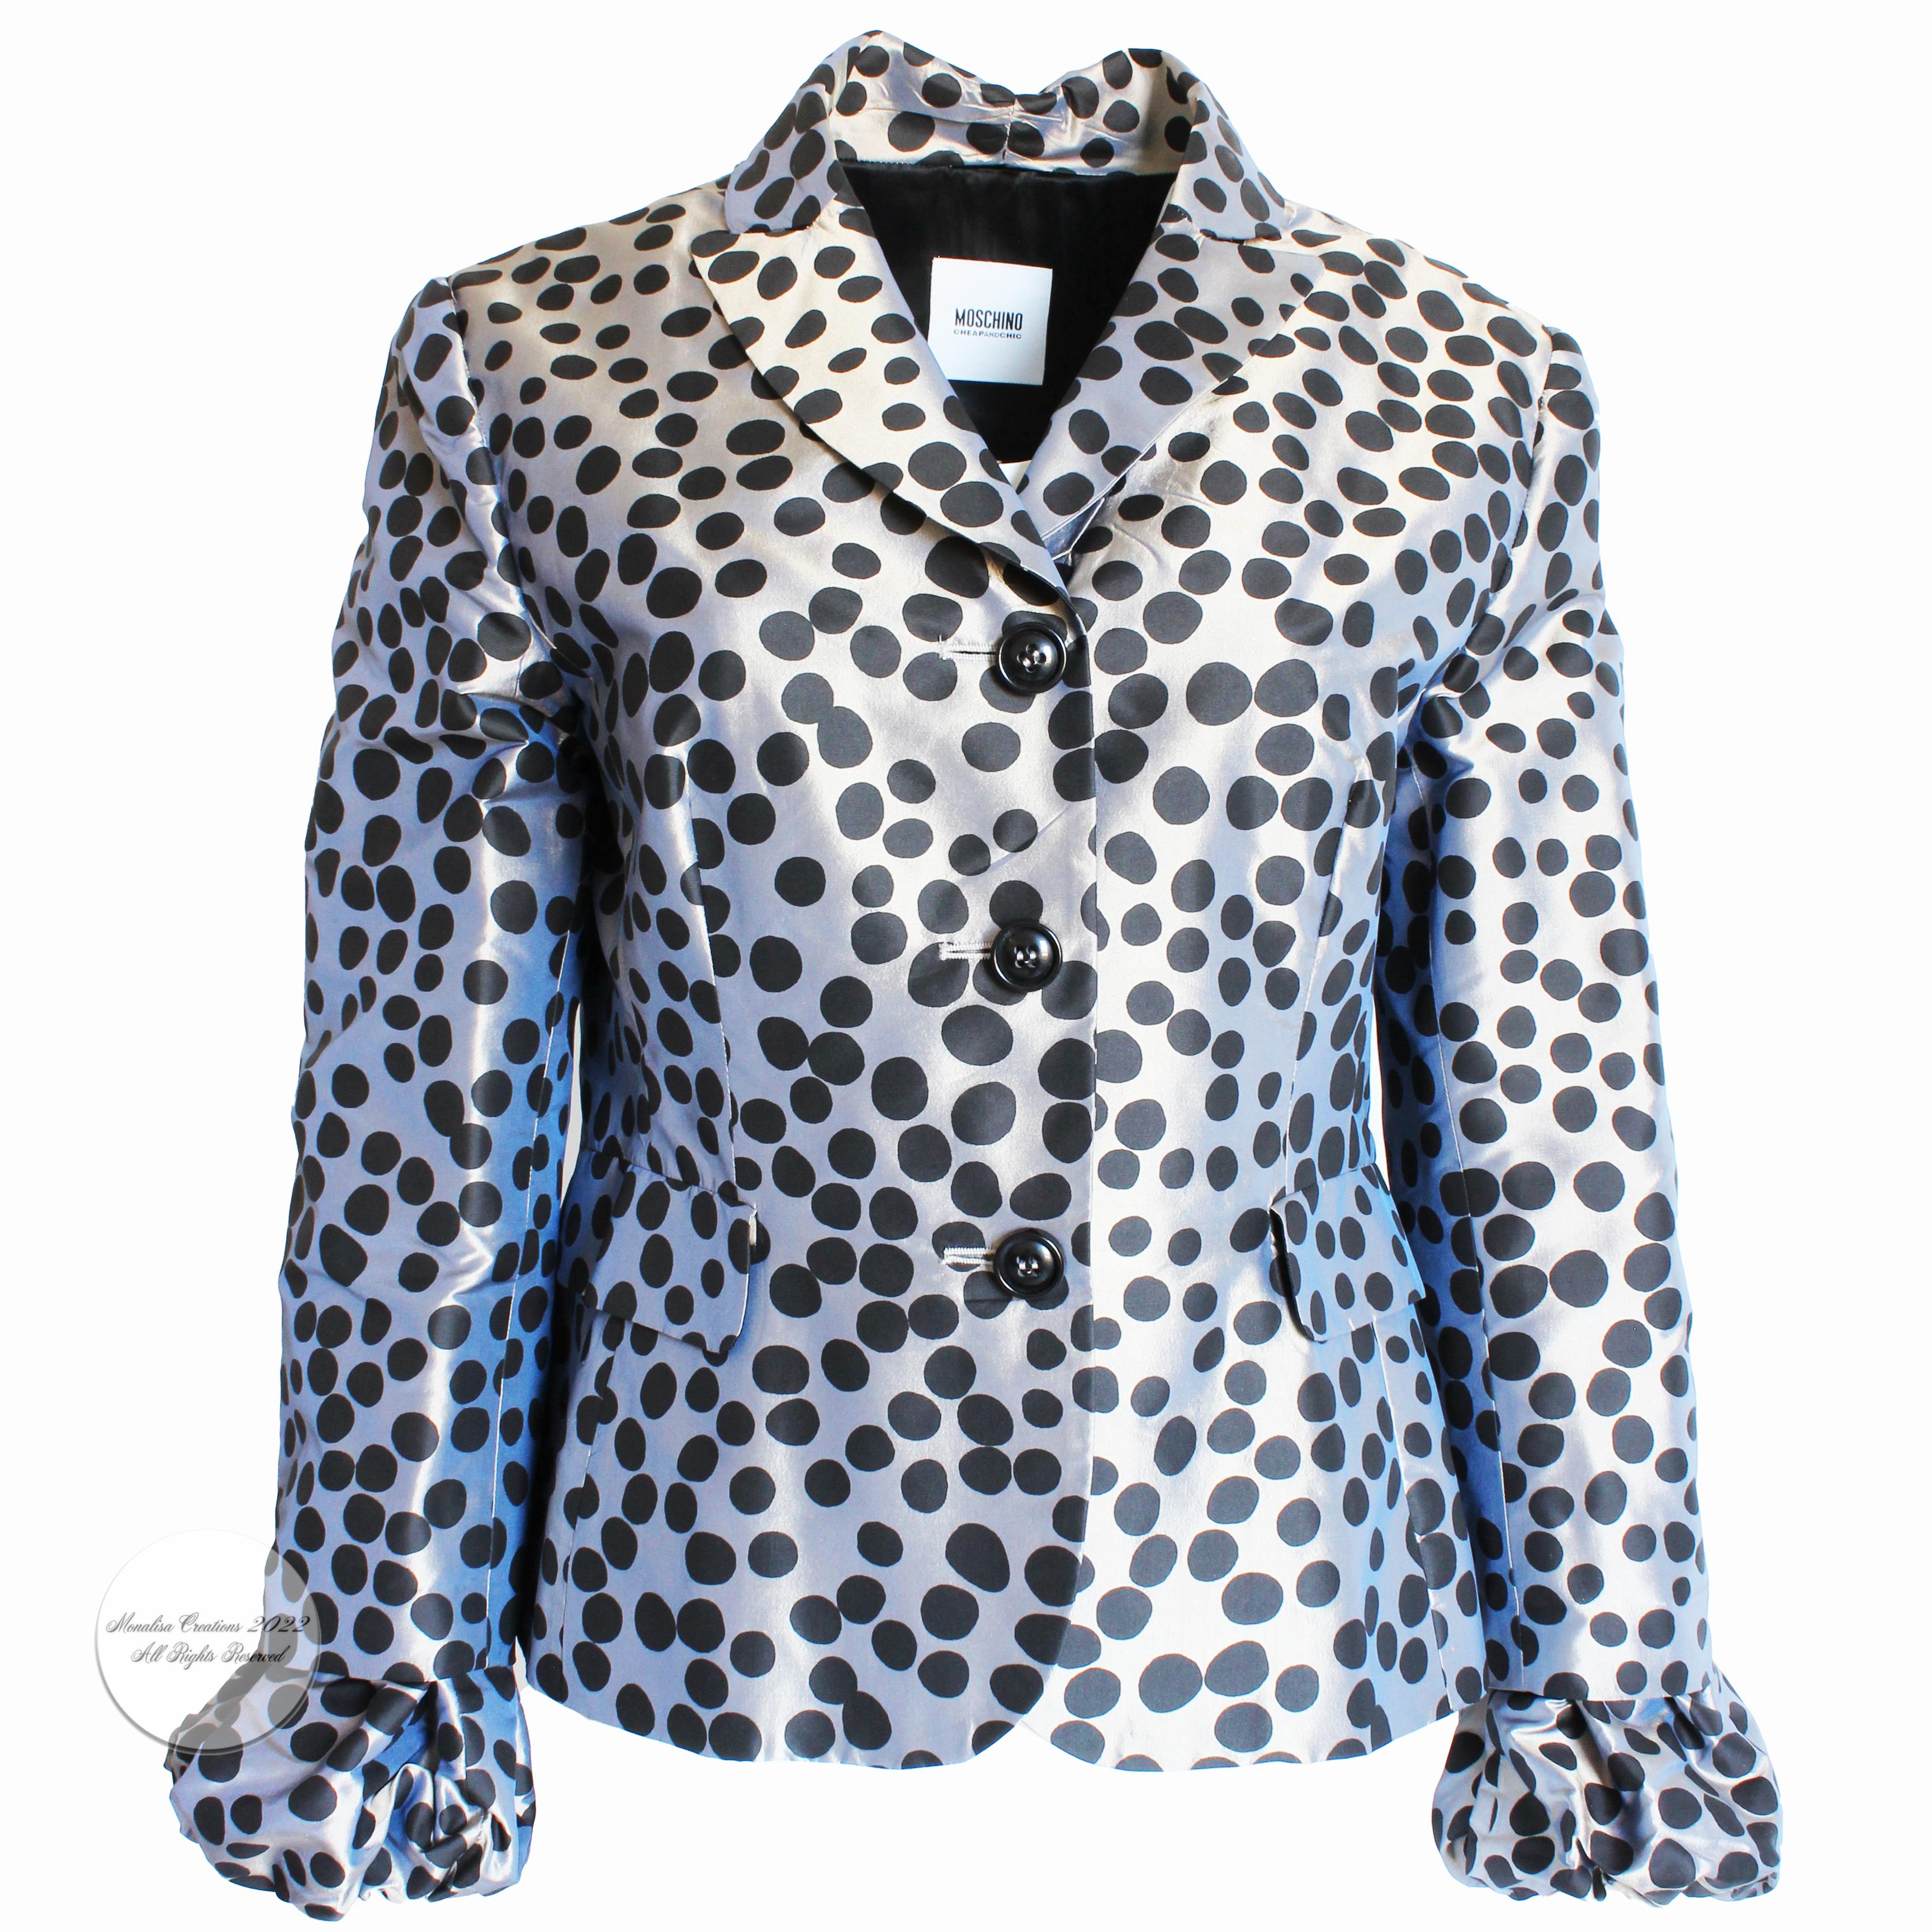 Moschino Jacket Gunmetal Silk with Polka Dots Puff Sleeves Cheap and Chic US 12 1